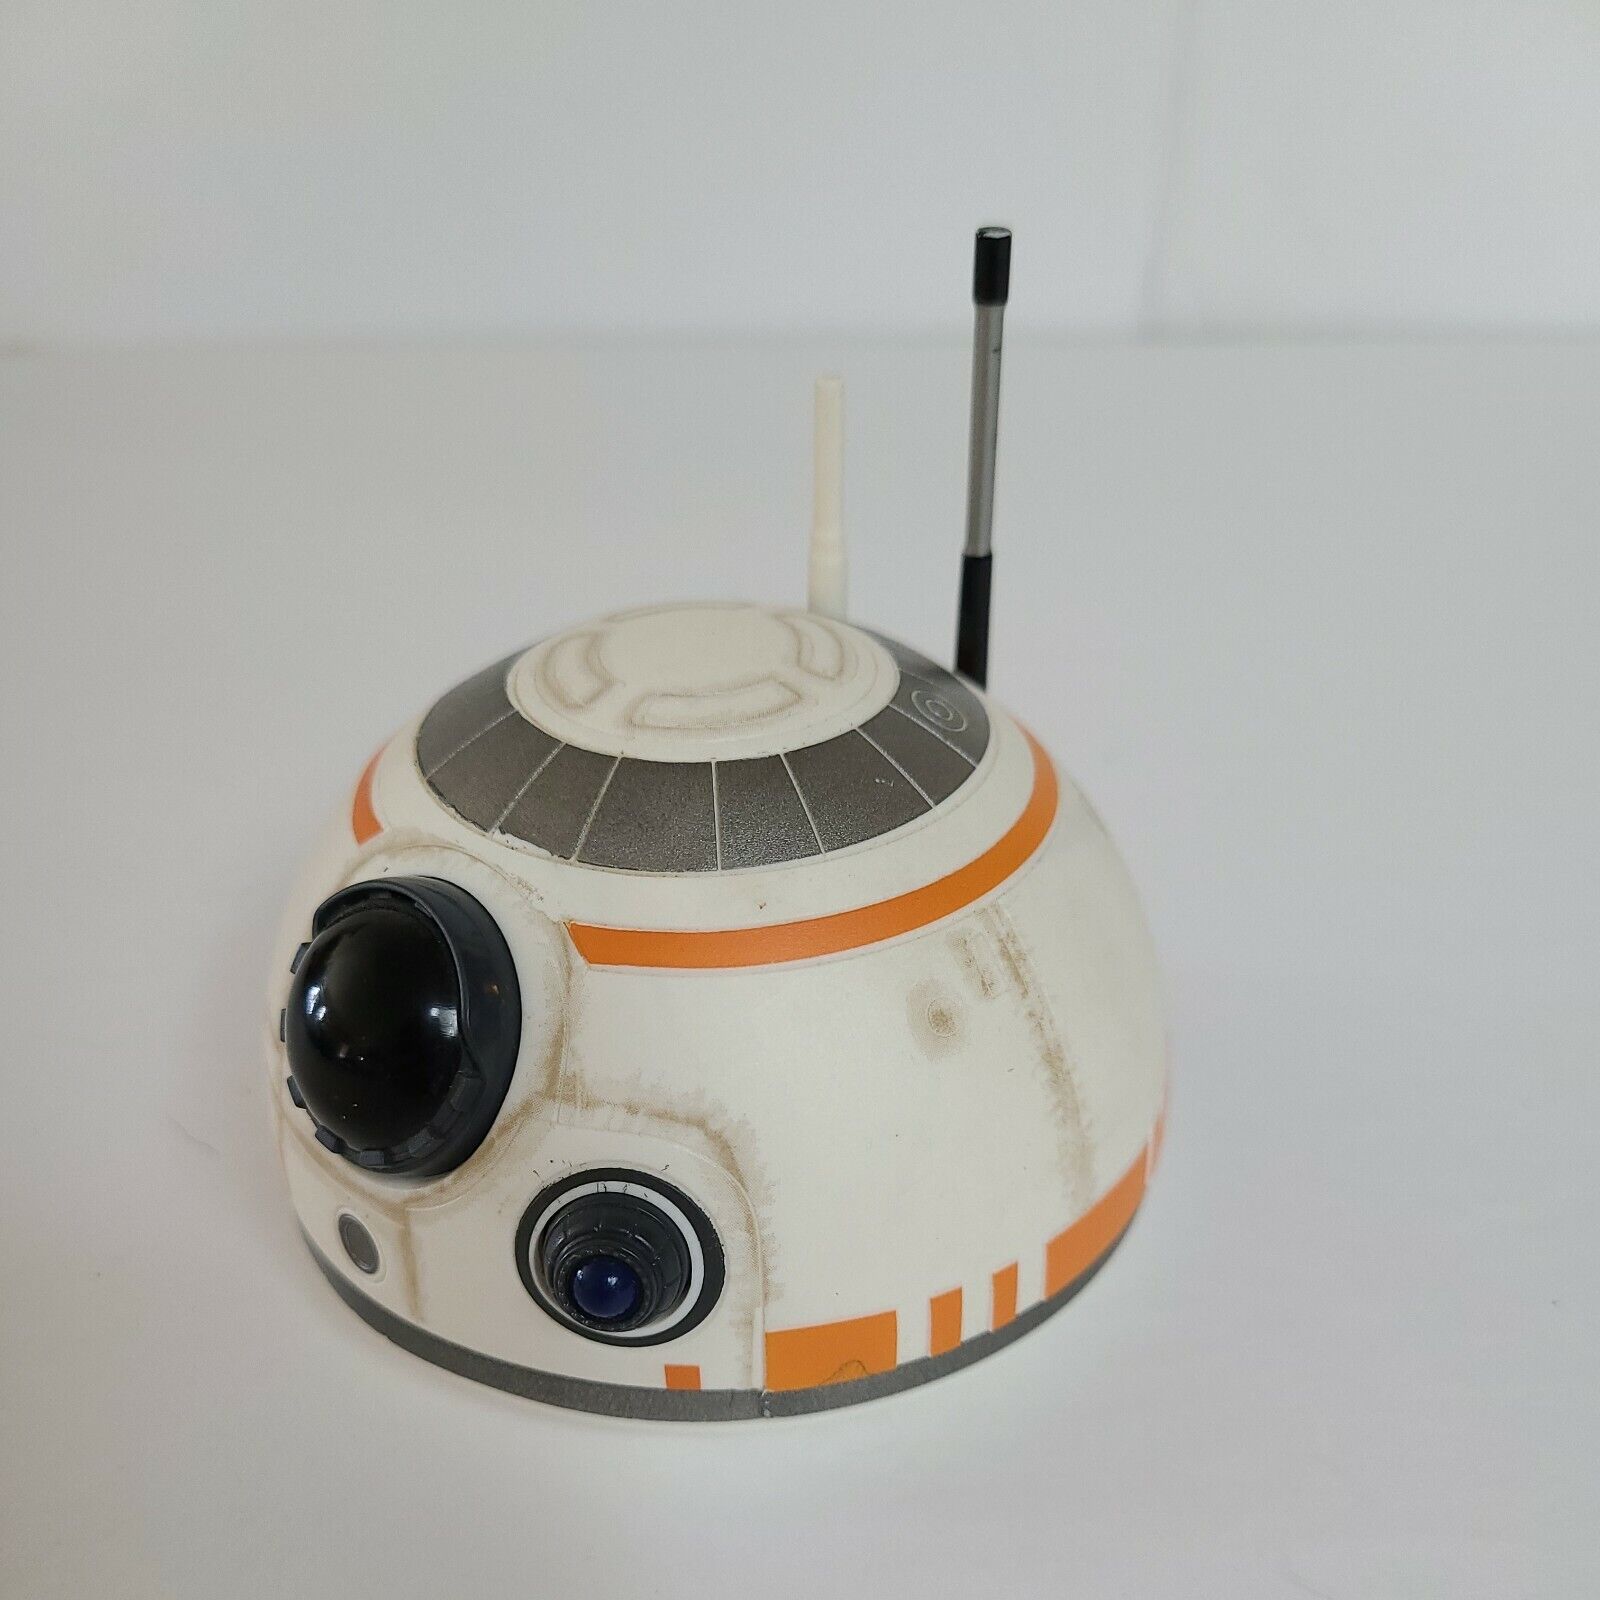 Disney Star Wars HYPERDRIVE BB-8 RC Toy HEAD ONLY Replacement Part